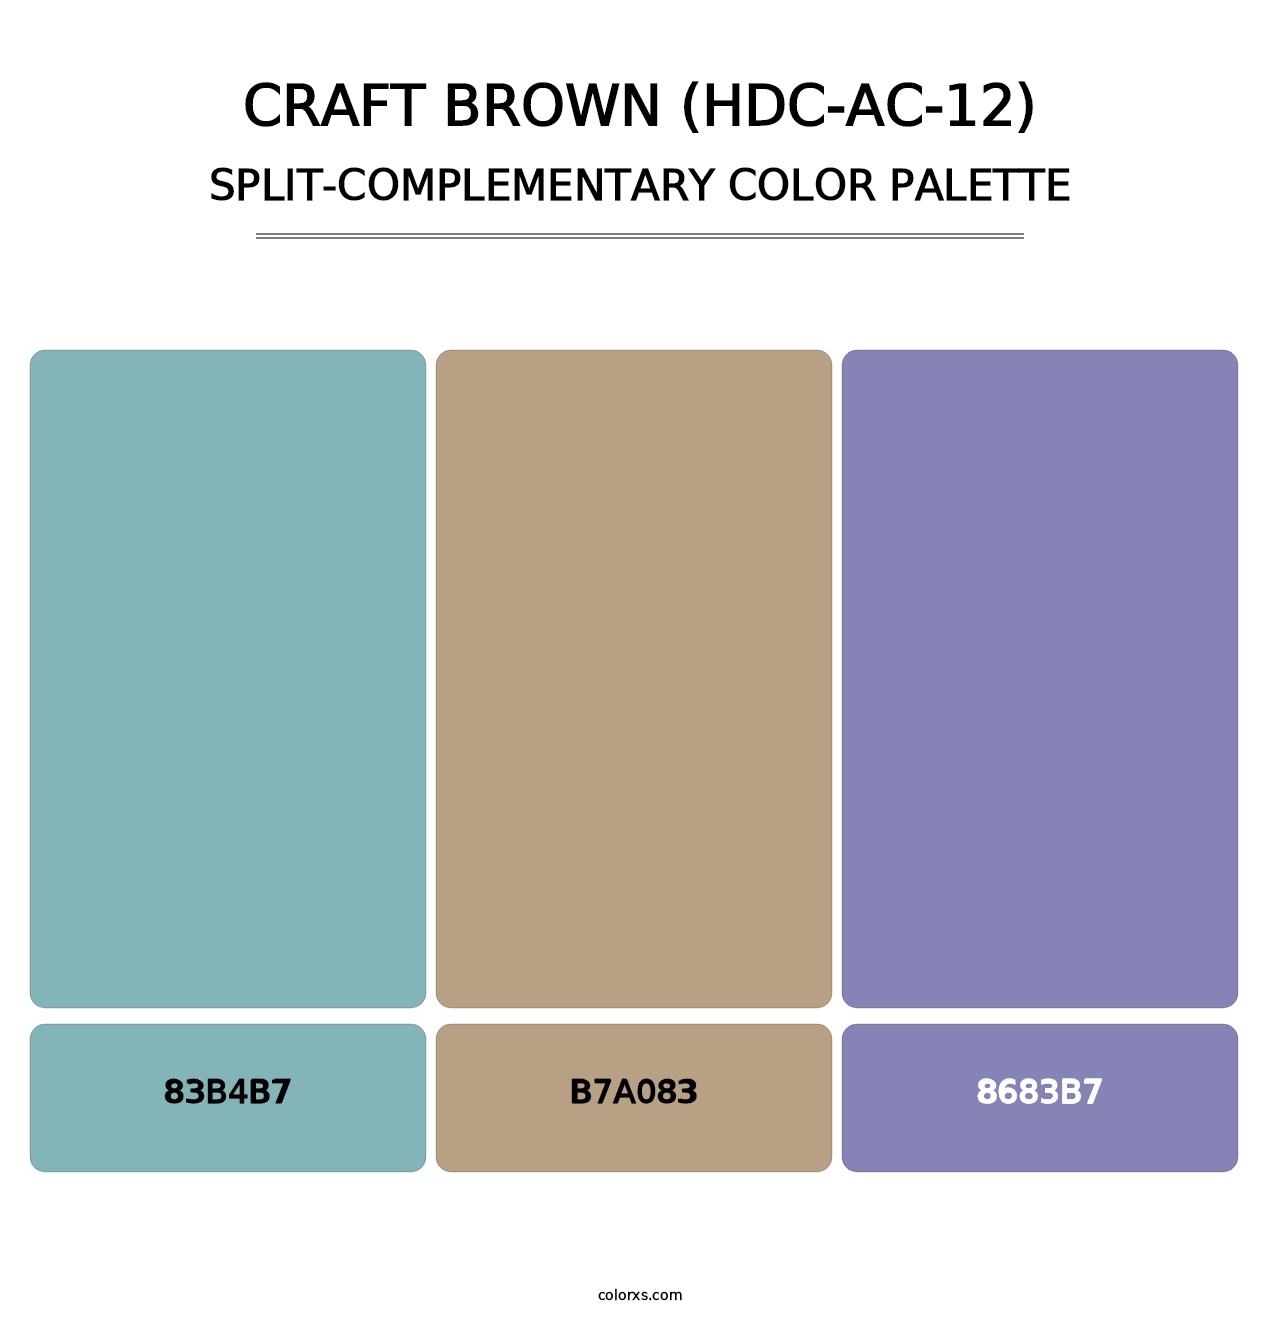 Craft Brown (HDC-AC-12) - Split-Complementary Color Palette